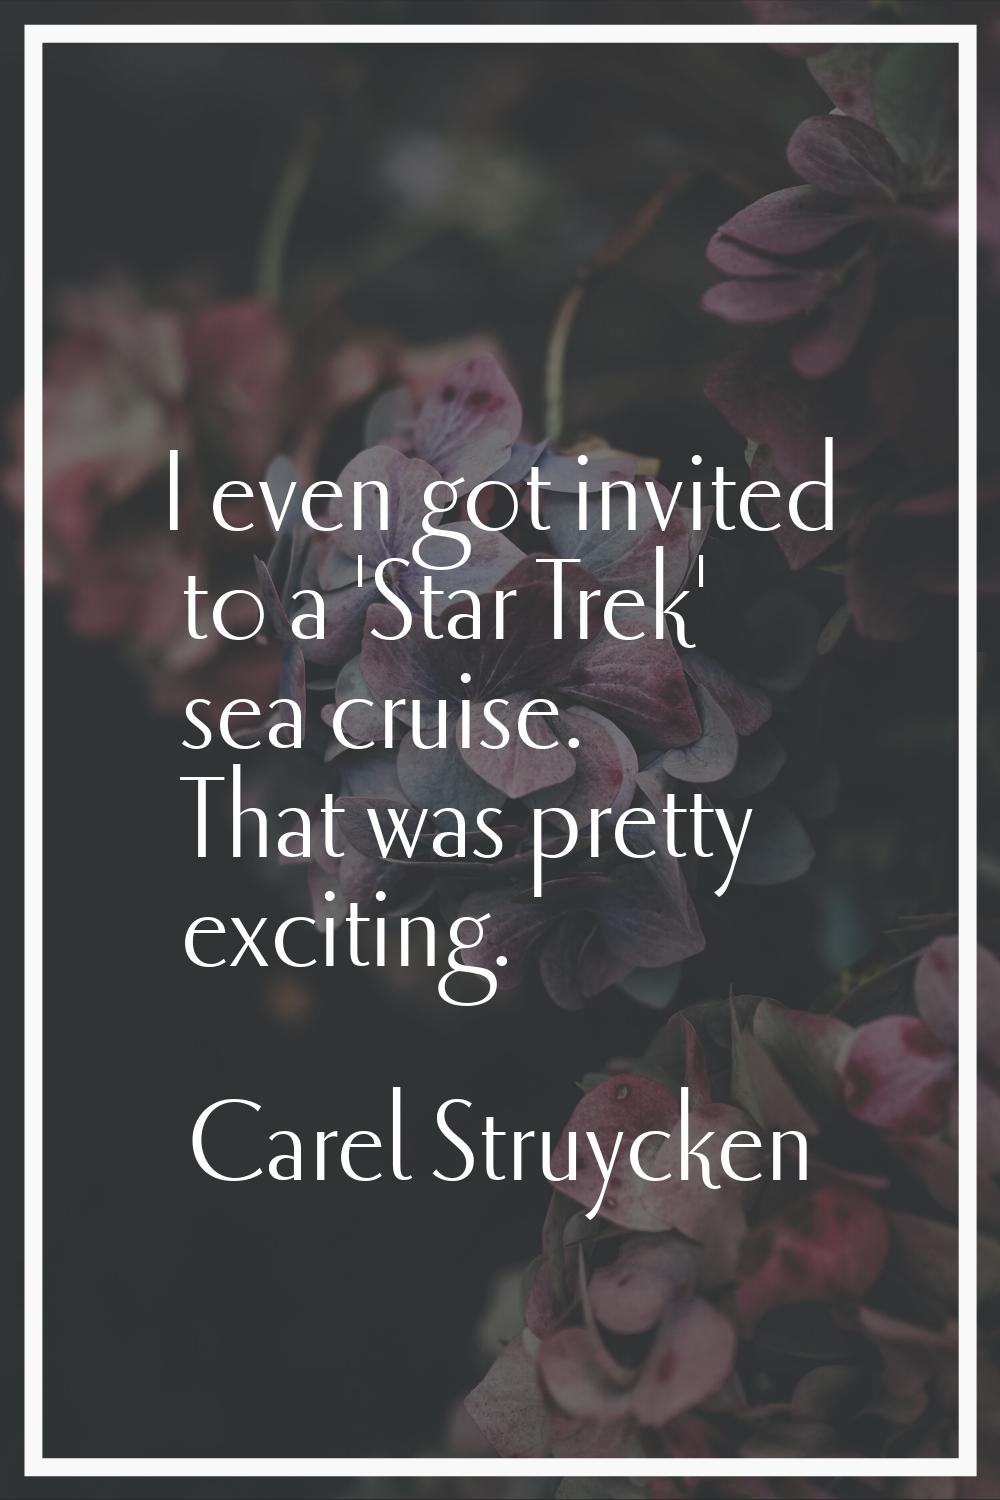 I even got invited to a 'Star Trek' sea cruise. That was pretty exciting.